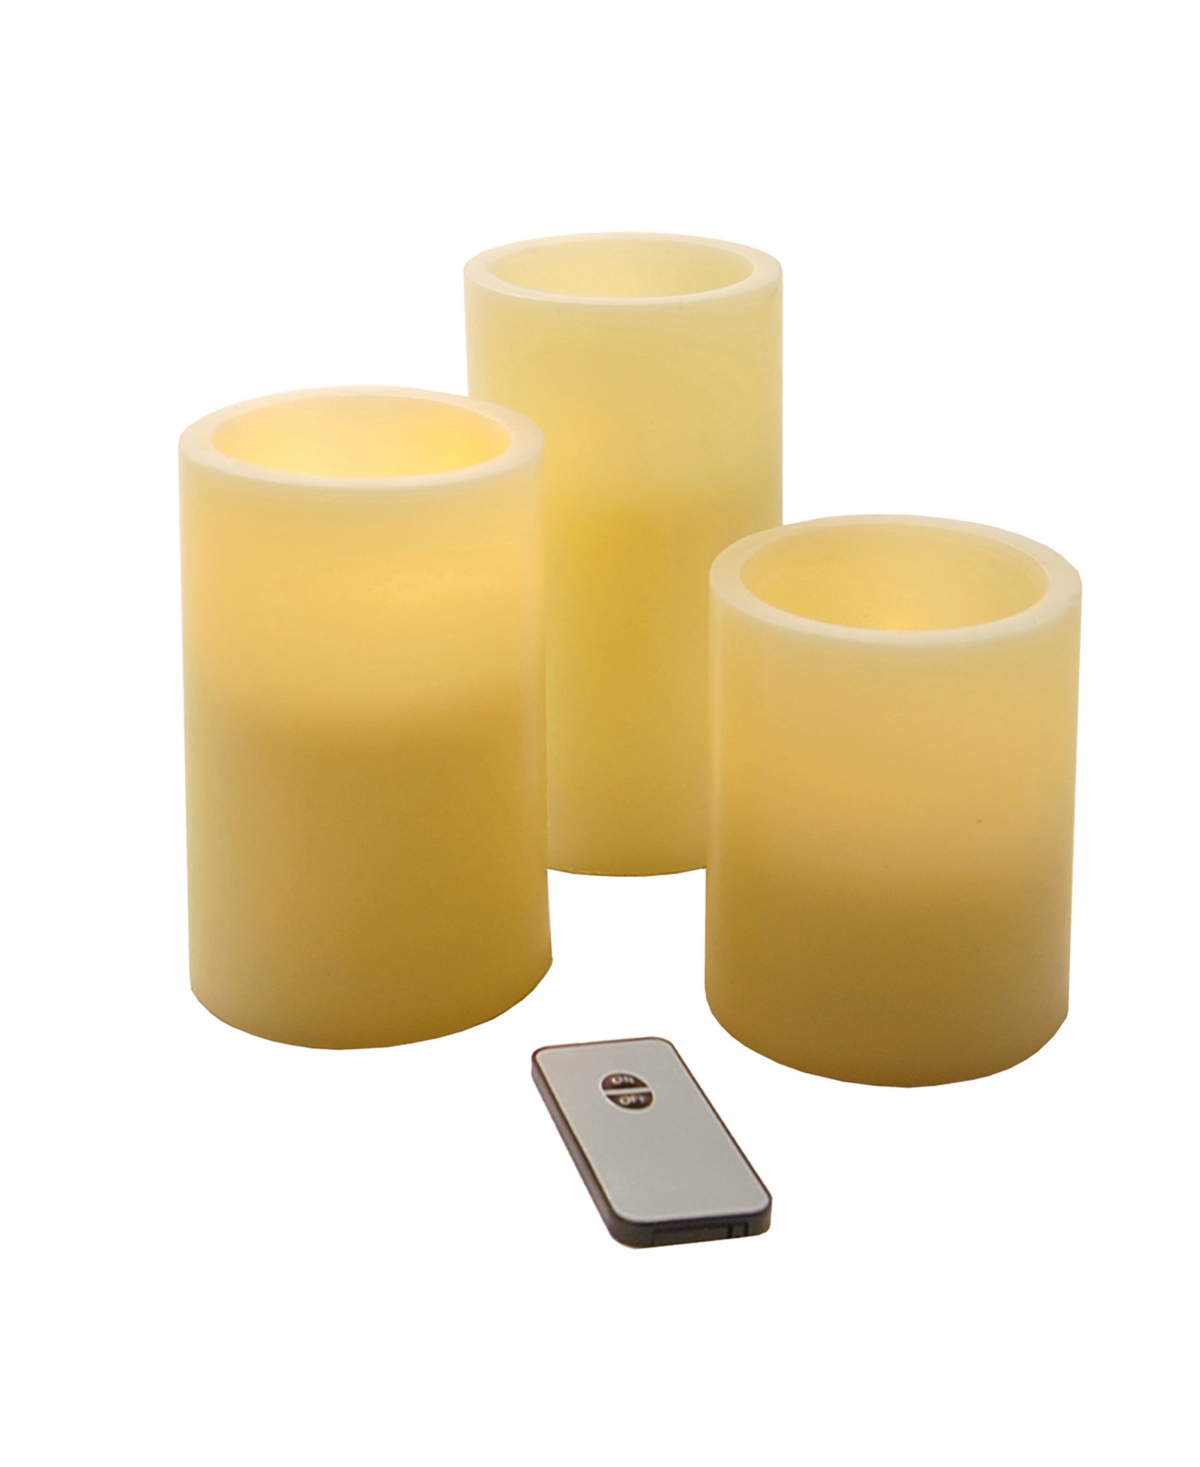 Jh Specialties Inc/lumabase Lumabase Set Of 3 Flickering Led Candles With Remote Control In Natural